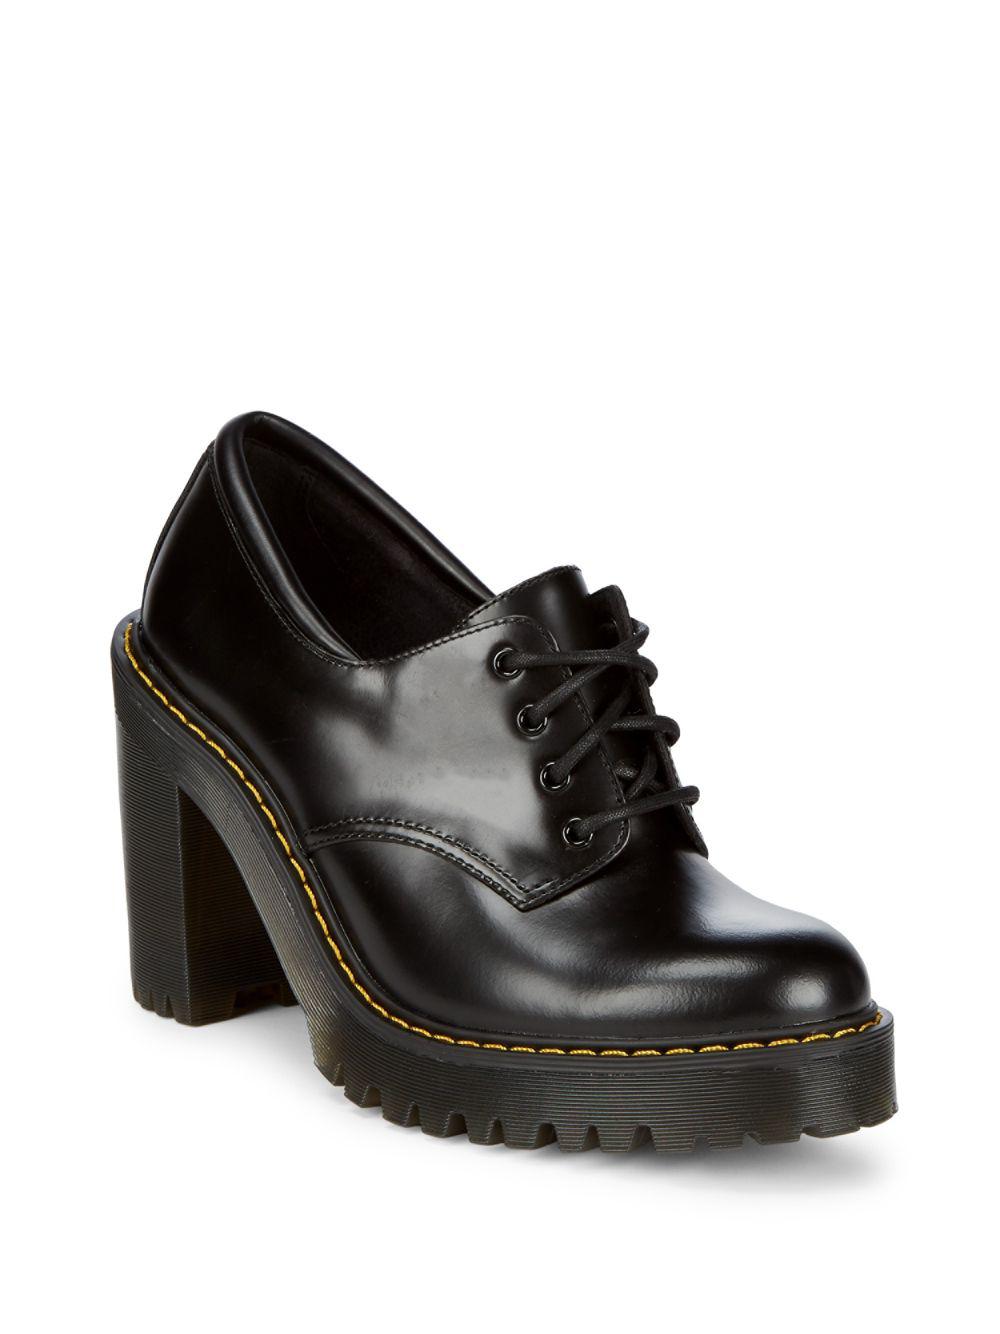 Dr. Martens Leather Salome Lace-up Heels in Black | Lyst Australia